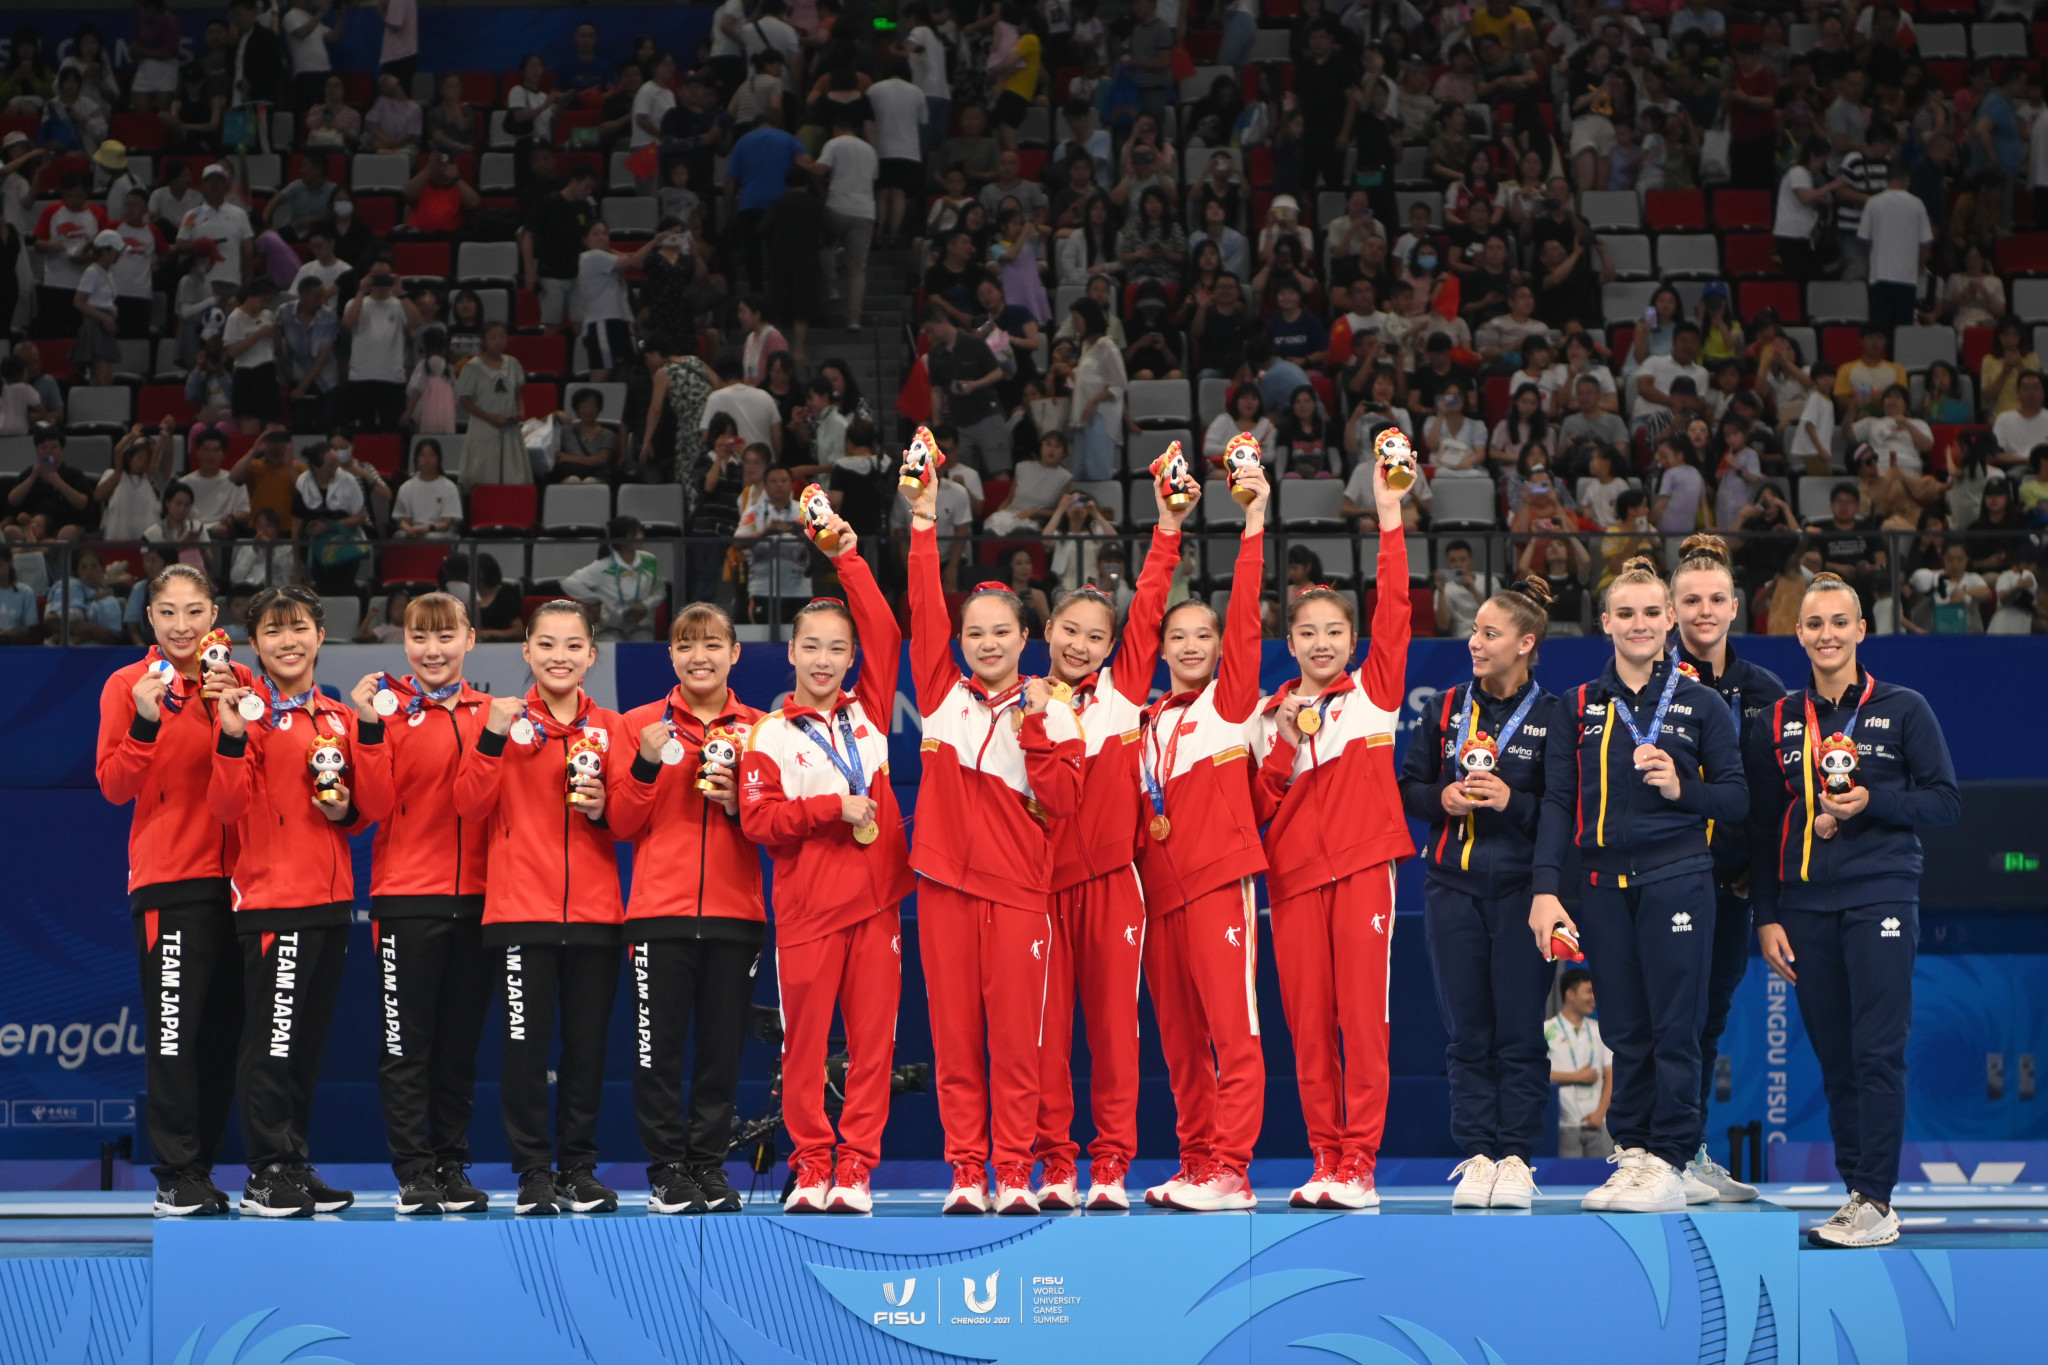 China also prevailed in the women's team artistic gymnastics final at the Dong'an Lake Sports Park Gymnasium ©Chengdu 2021